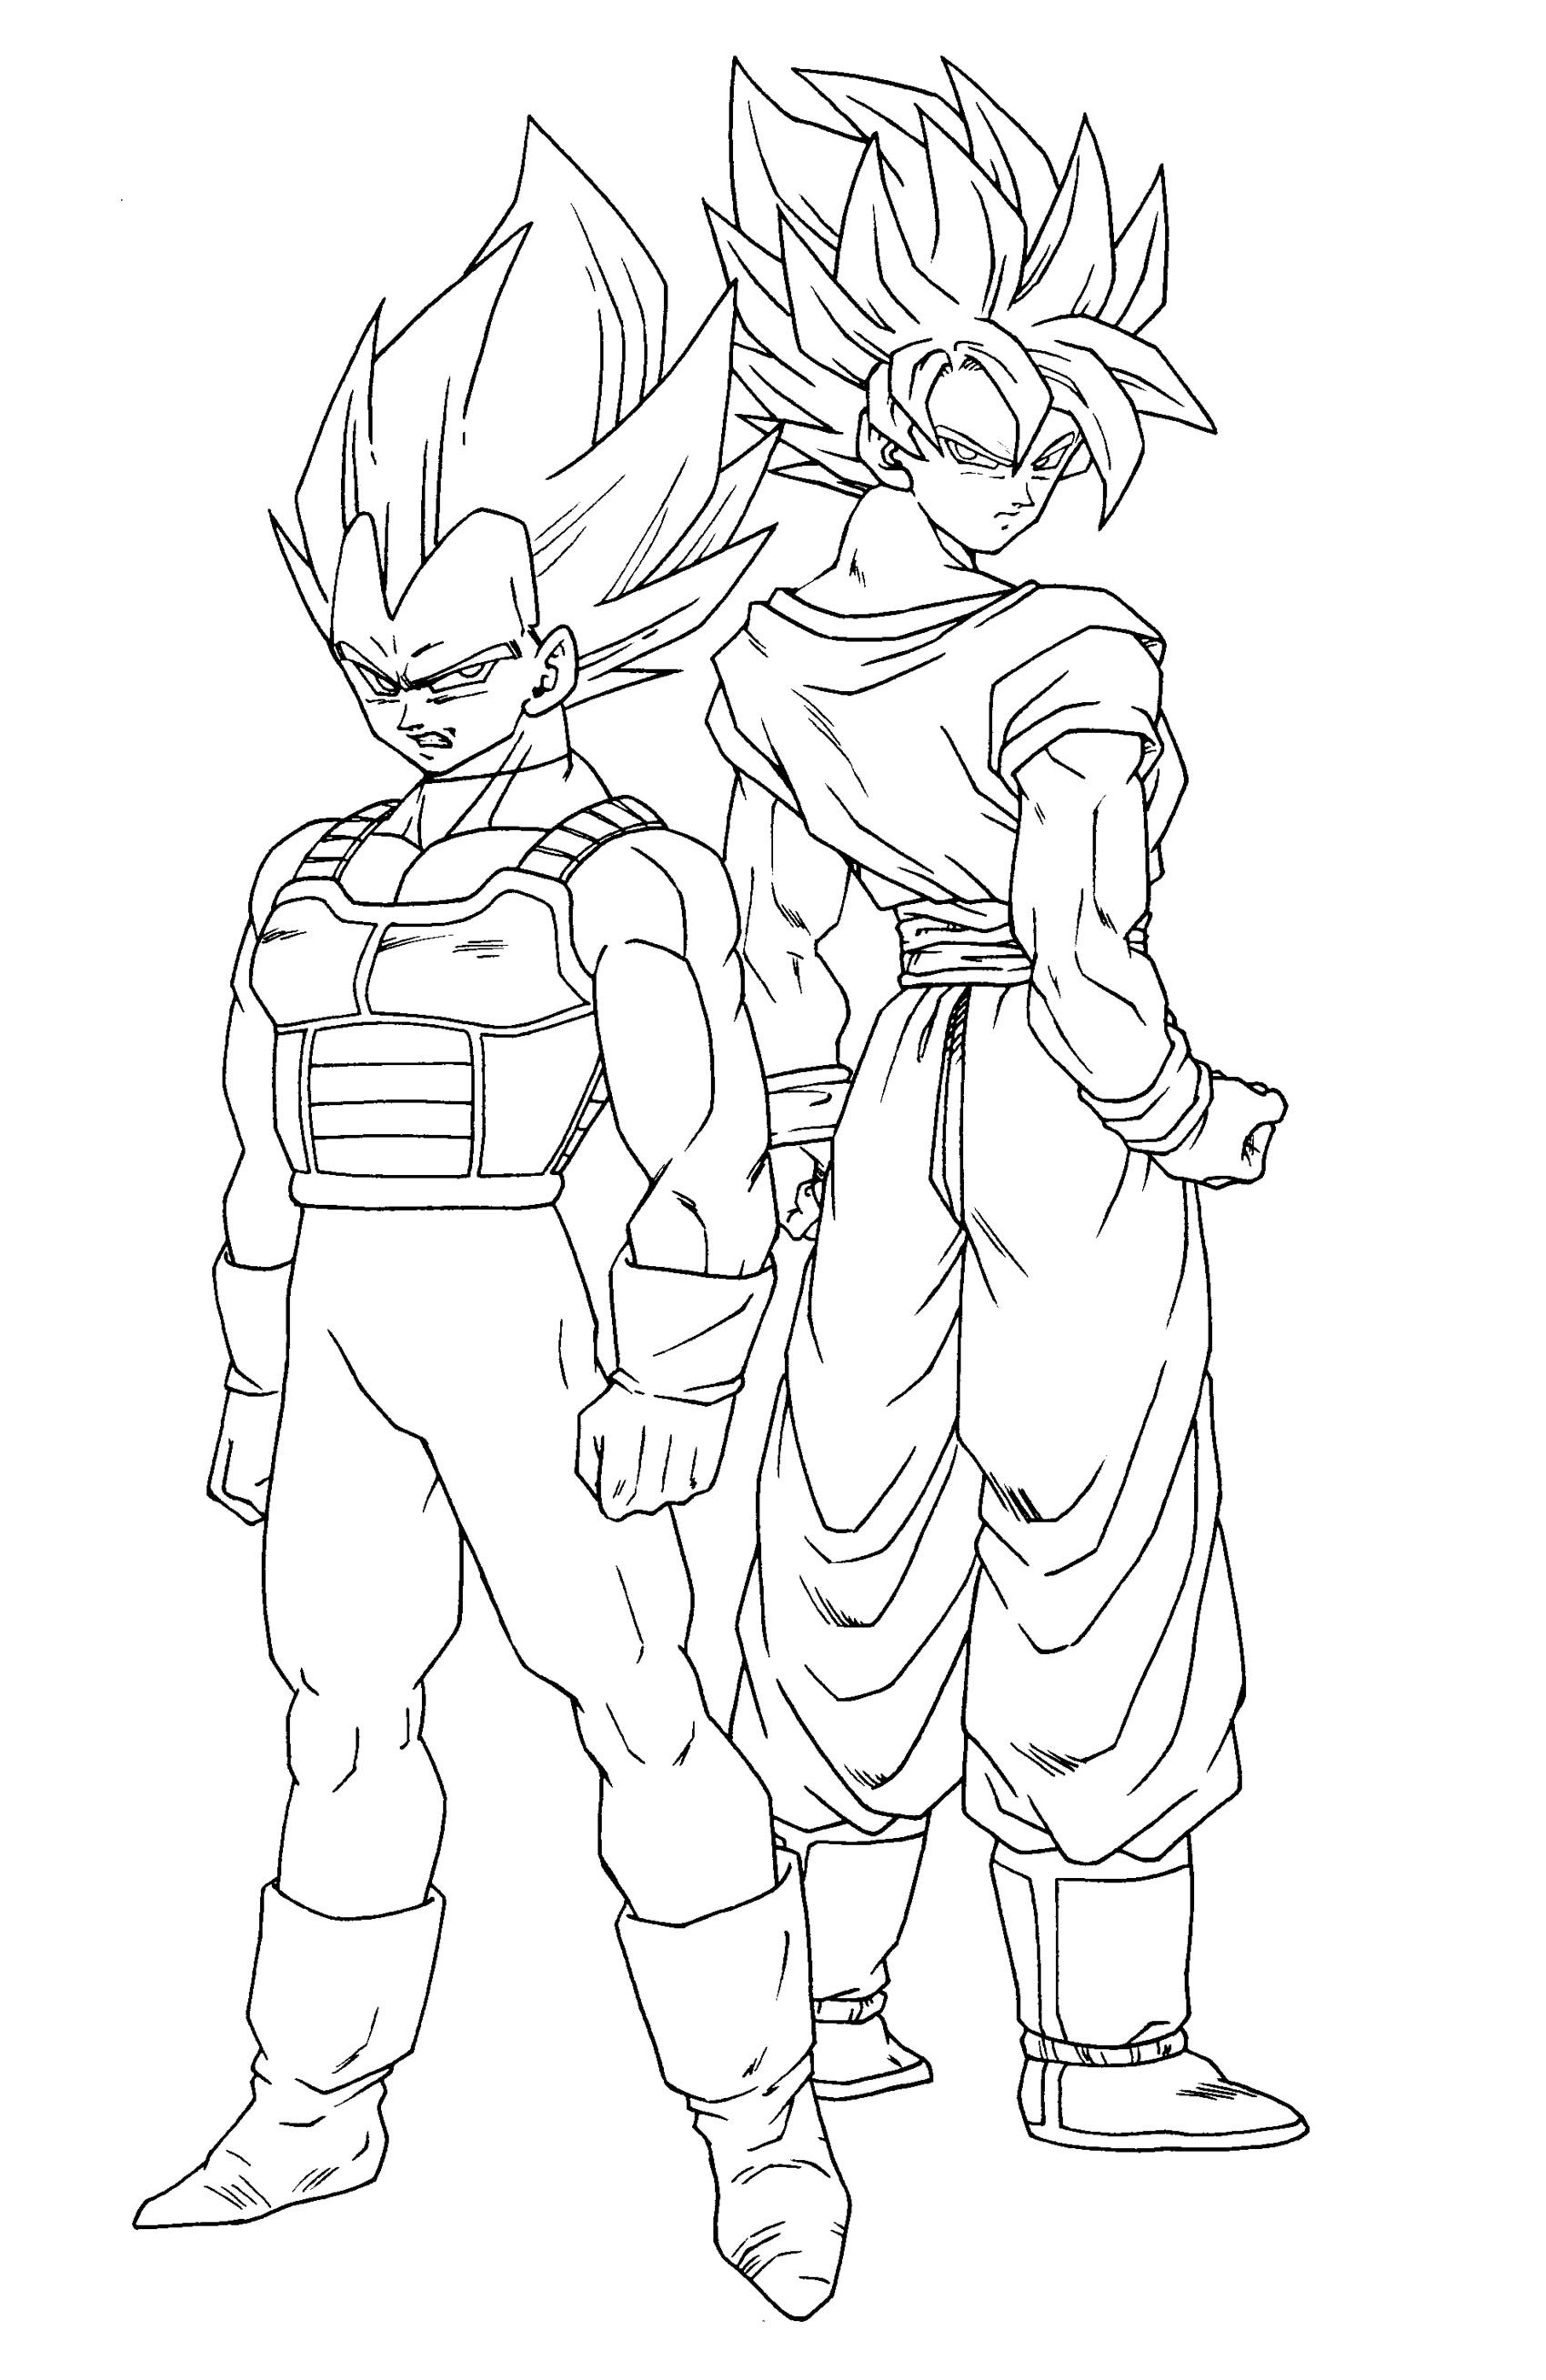 Dragon Ball Z #38548 (Cartoons) - Printable coloring pages